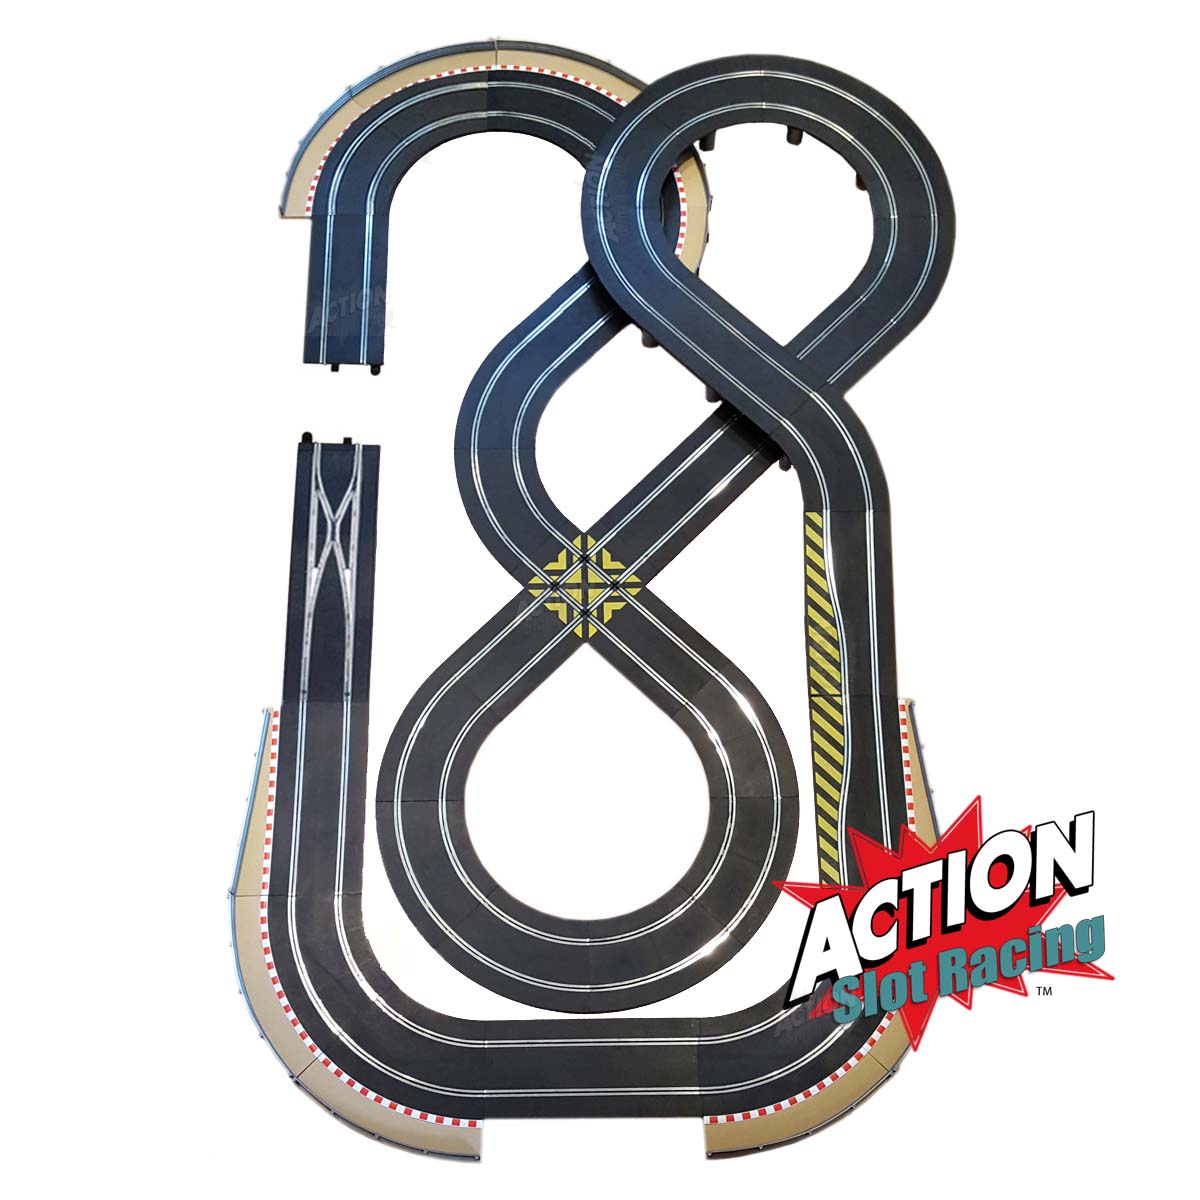 Scalextric Sport 1:32 Track Set - Double Figure-Of-Eight Layout ARC Pro